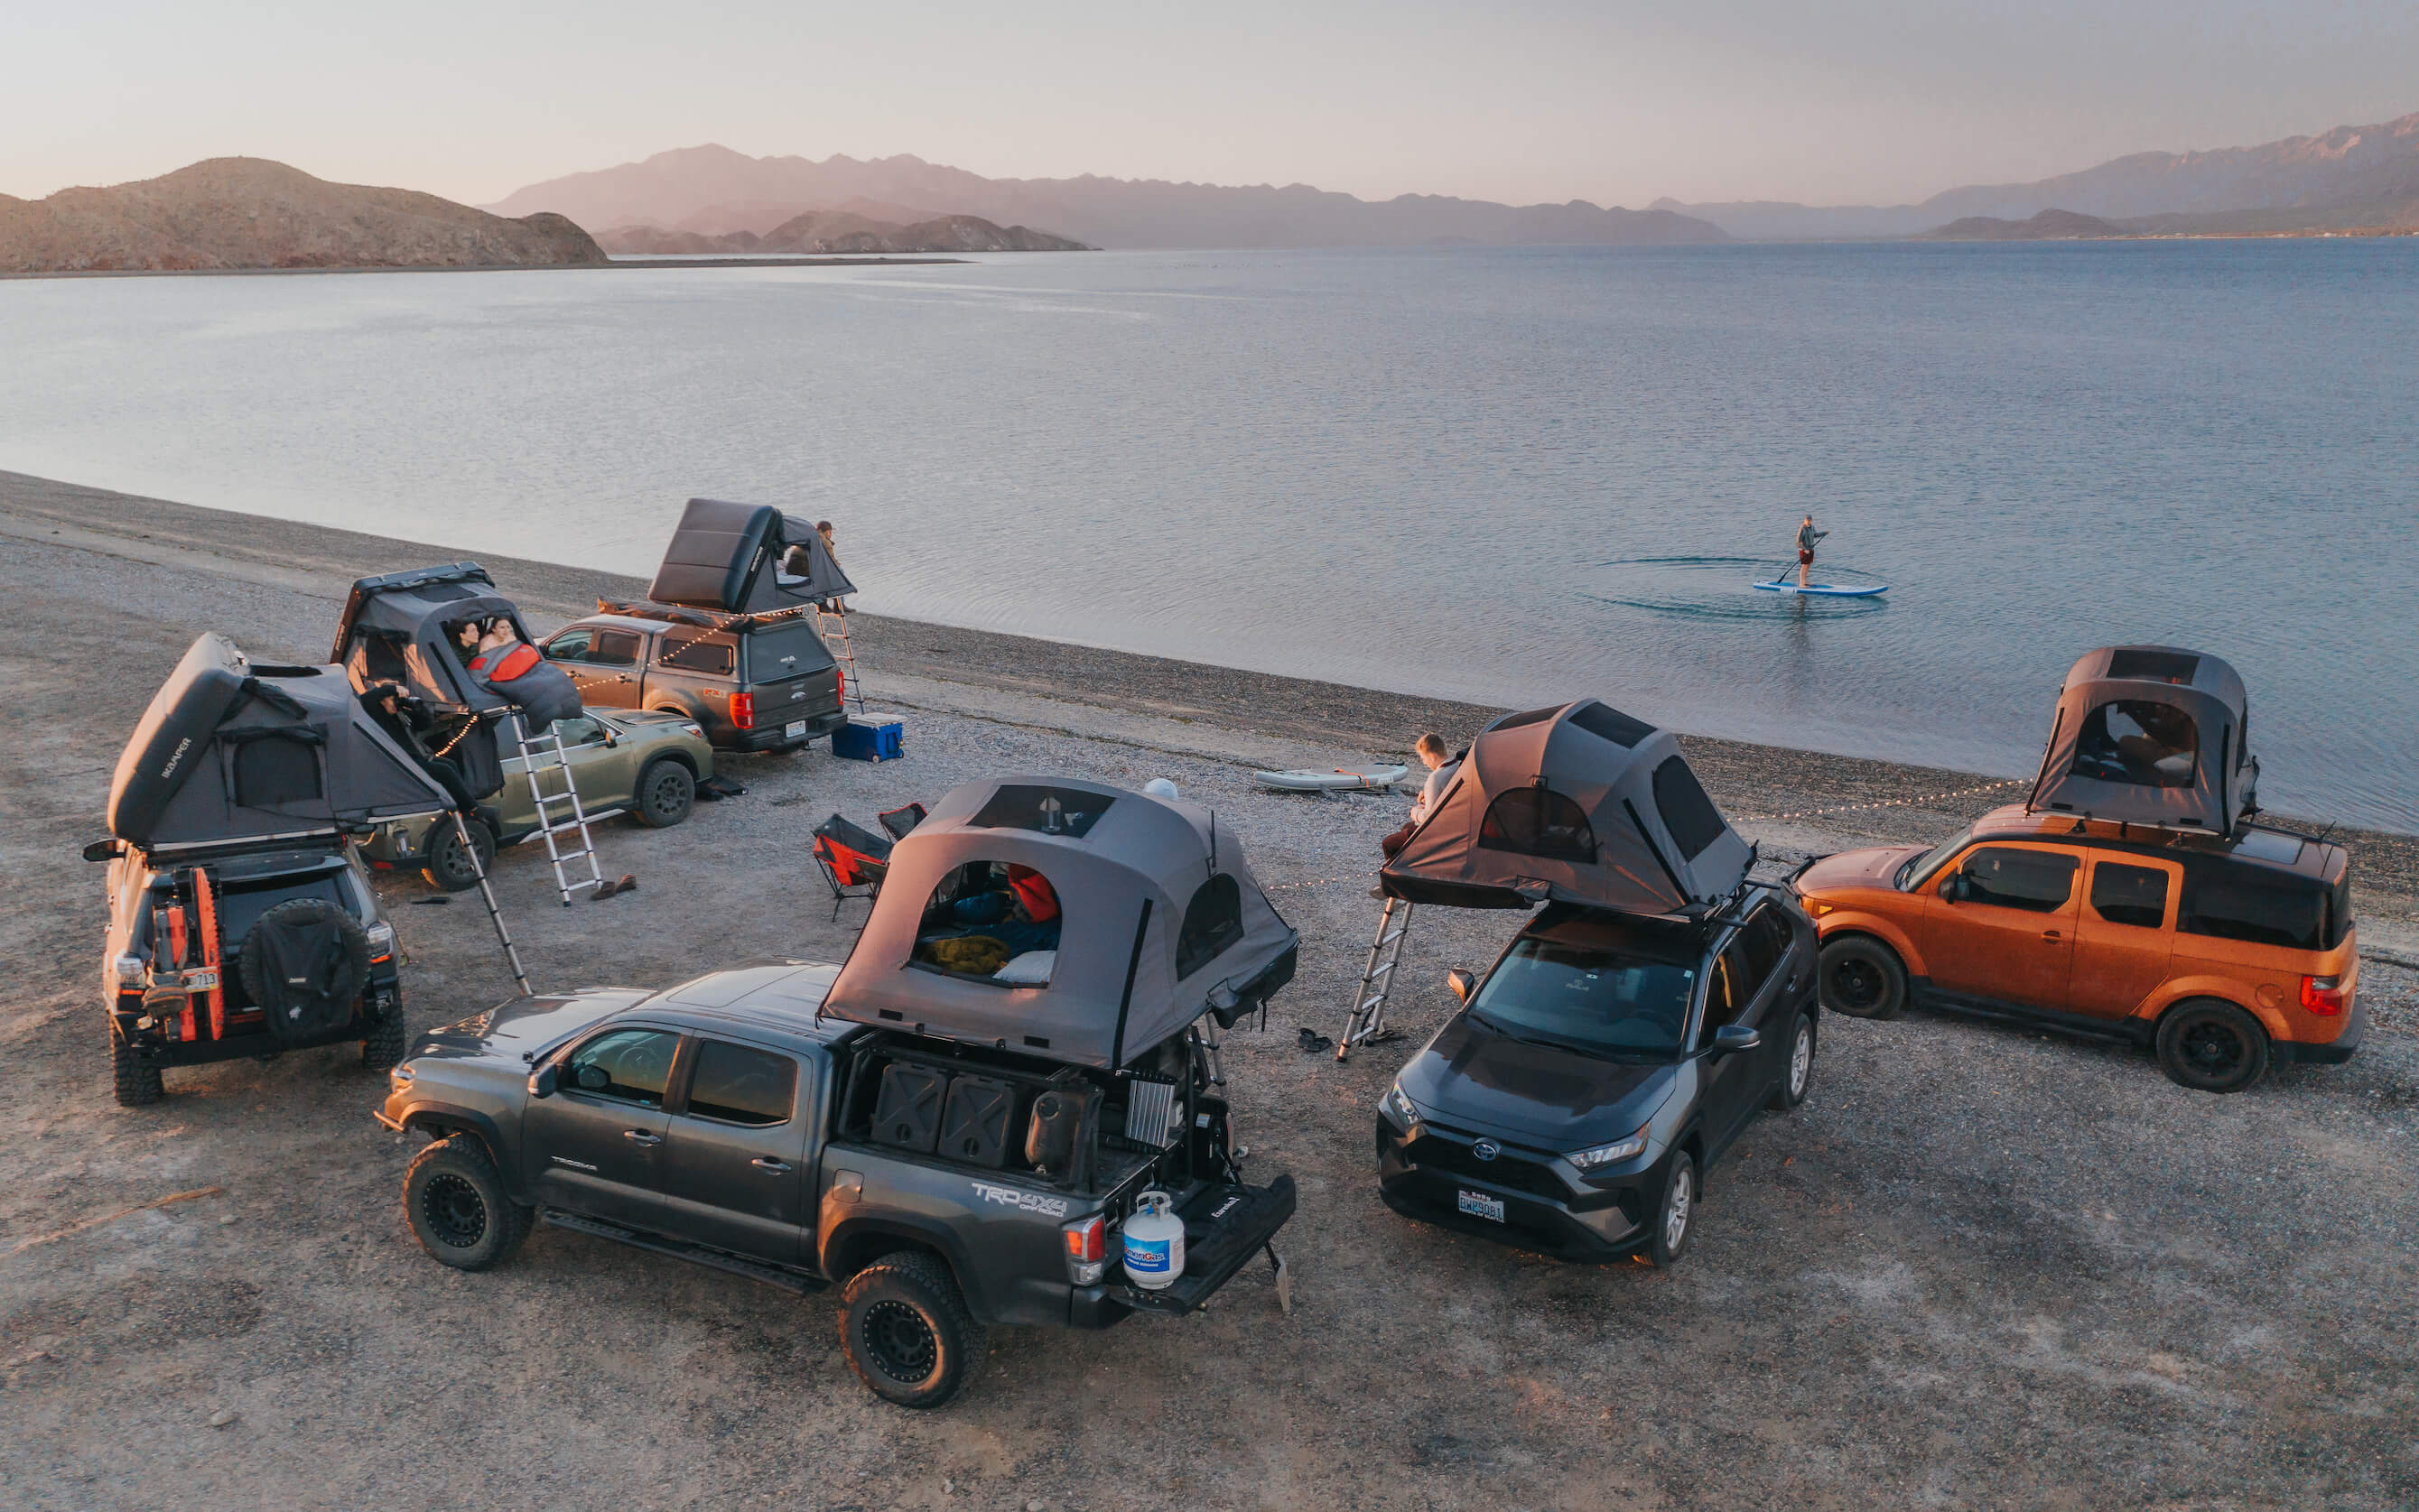 iKamper roof top tents on the beach